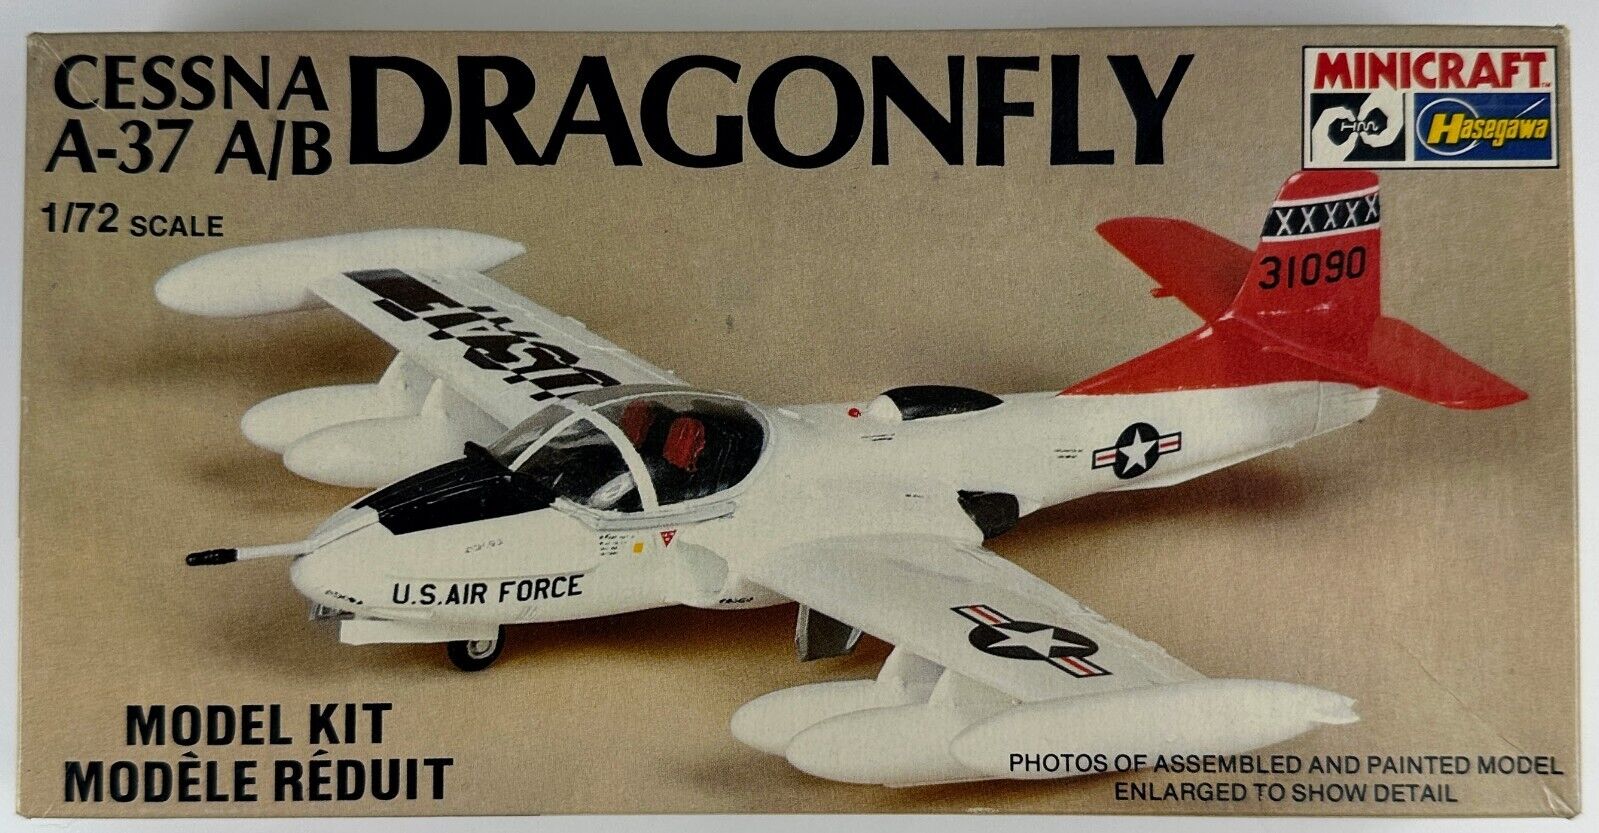 Cessna A-37 A/B Dragonfly 1:72 Hasegawa 1036 Minicraft Complete Kit Open Box